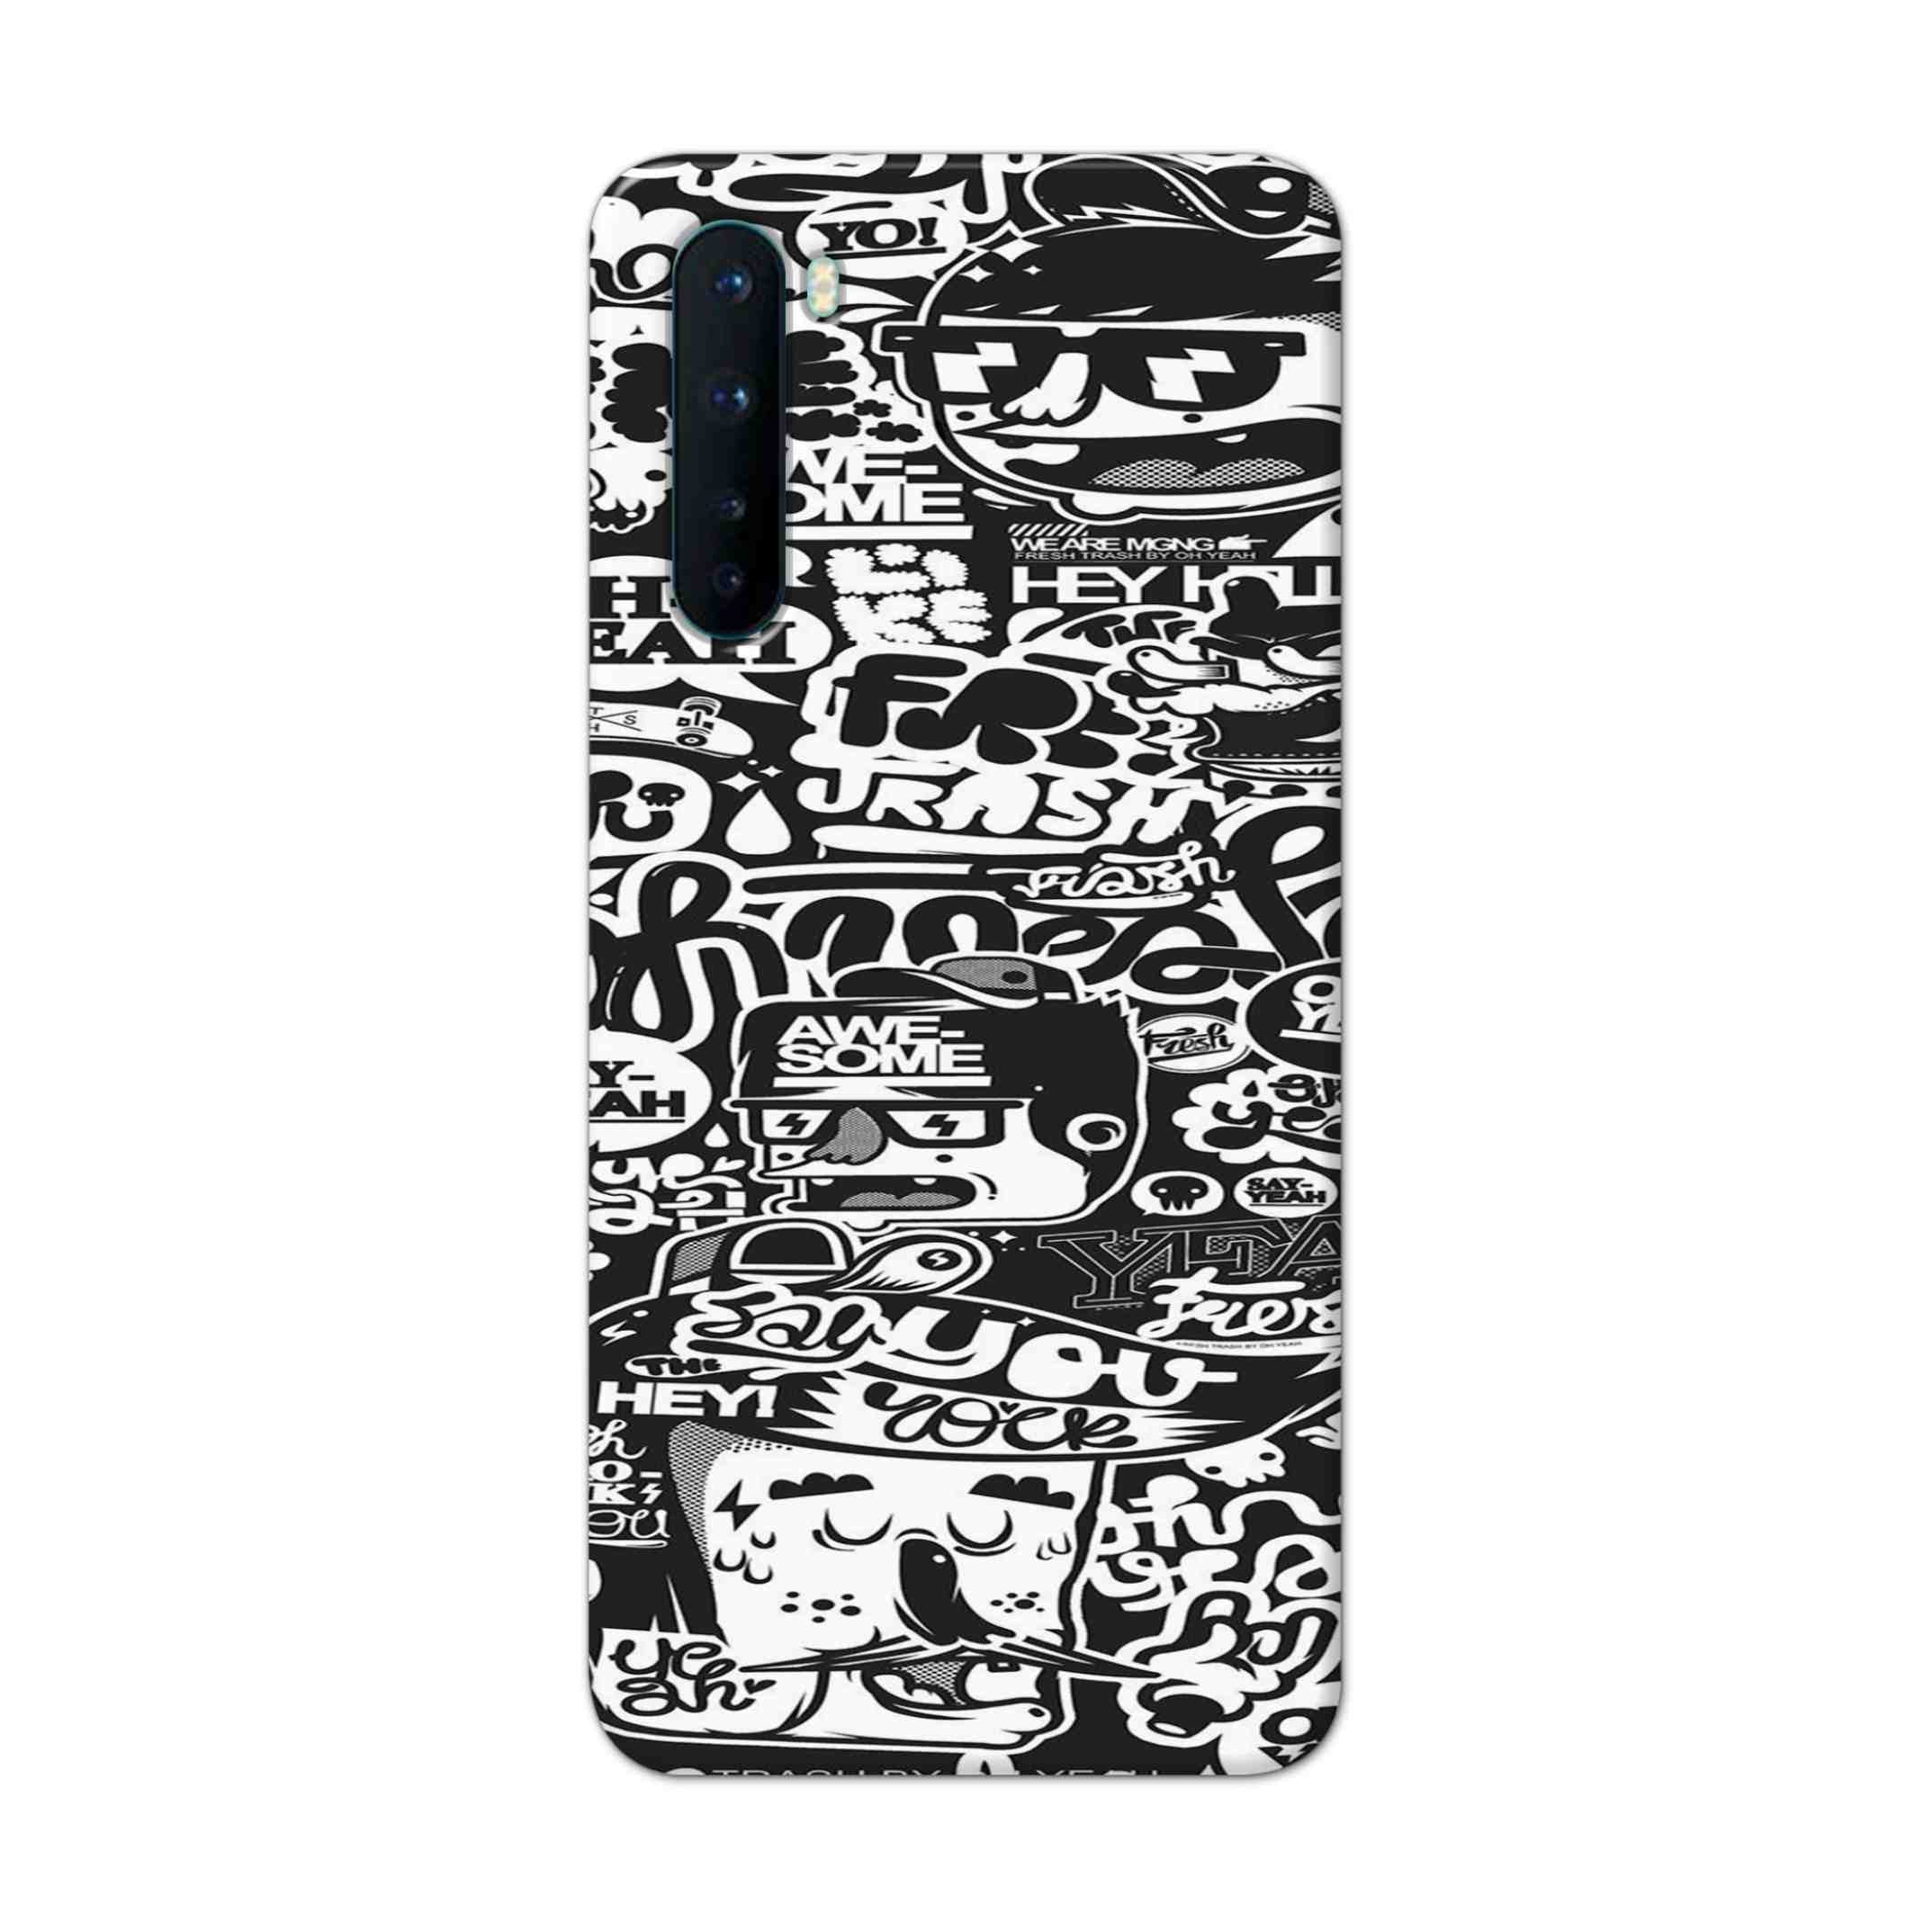 Buy Awesome Hard Back Mobile Phone Case Cover For OnePlus Nord Online